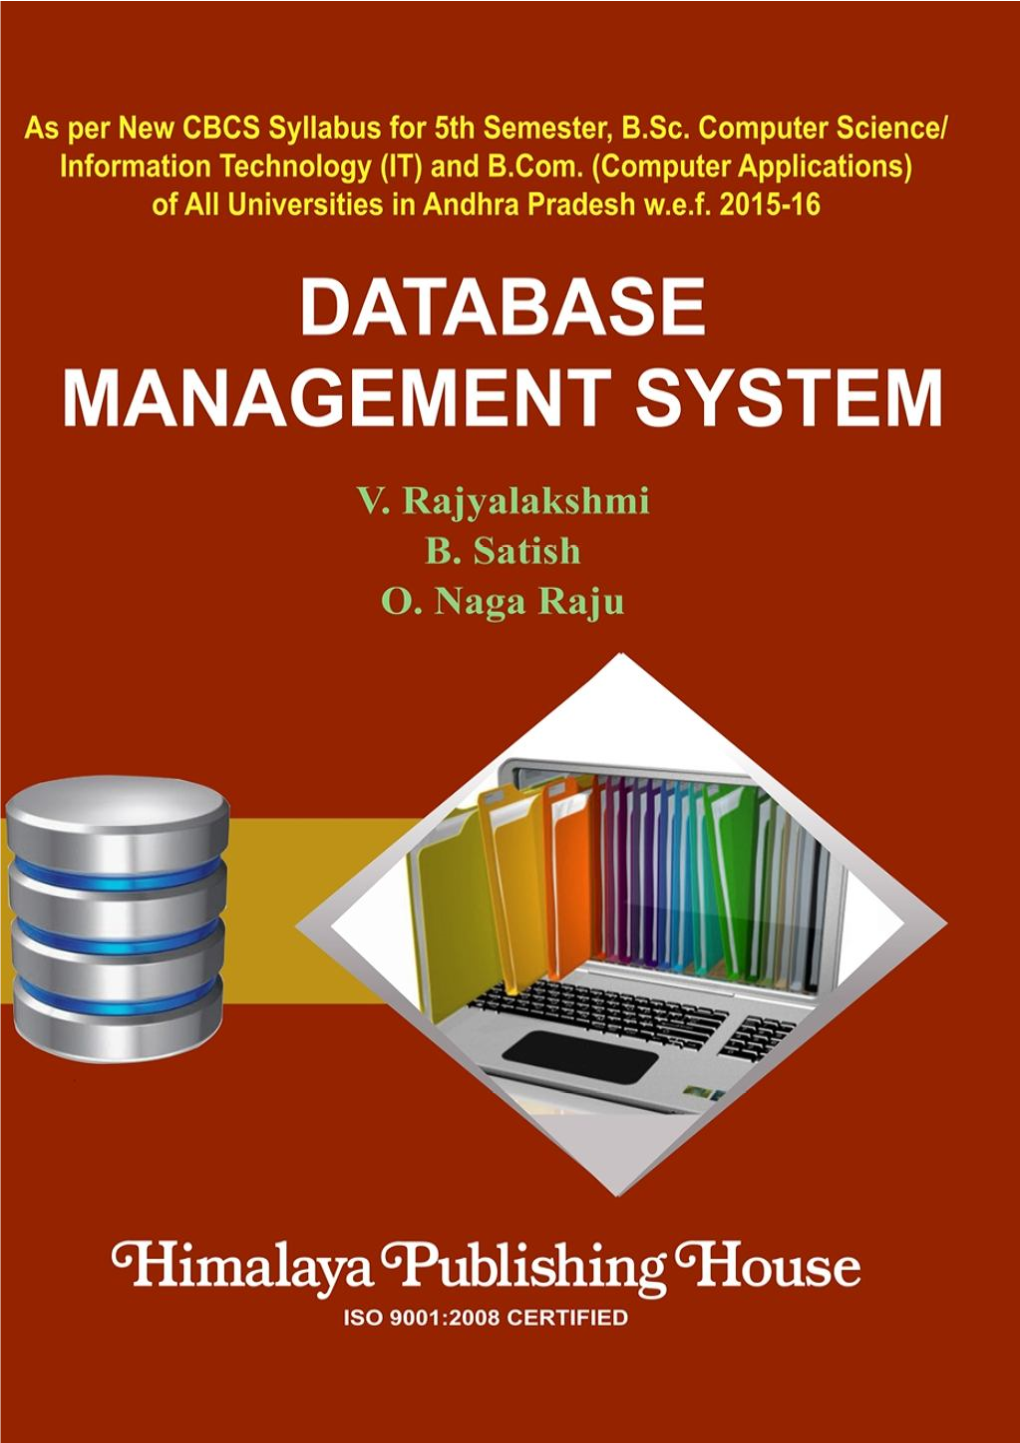 DATABASE MANAGEMENT SYSTEM (As Per New CBCS Syllabus for Fifth Semester B.Sc